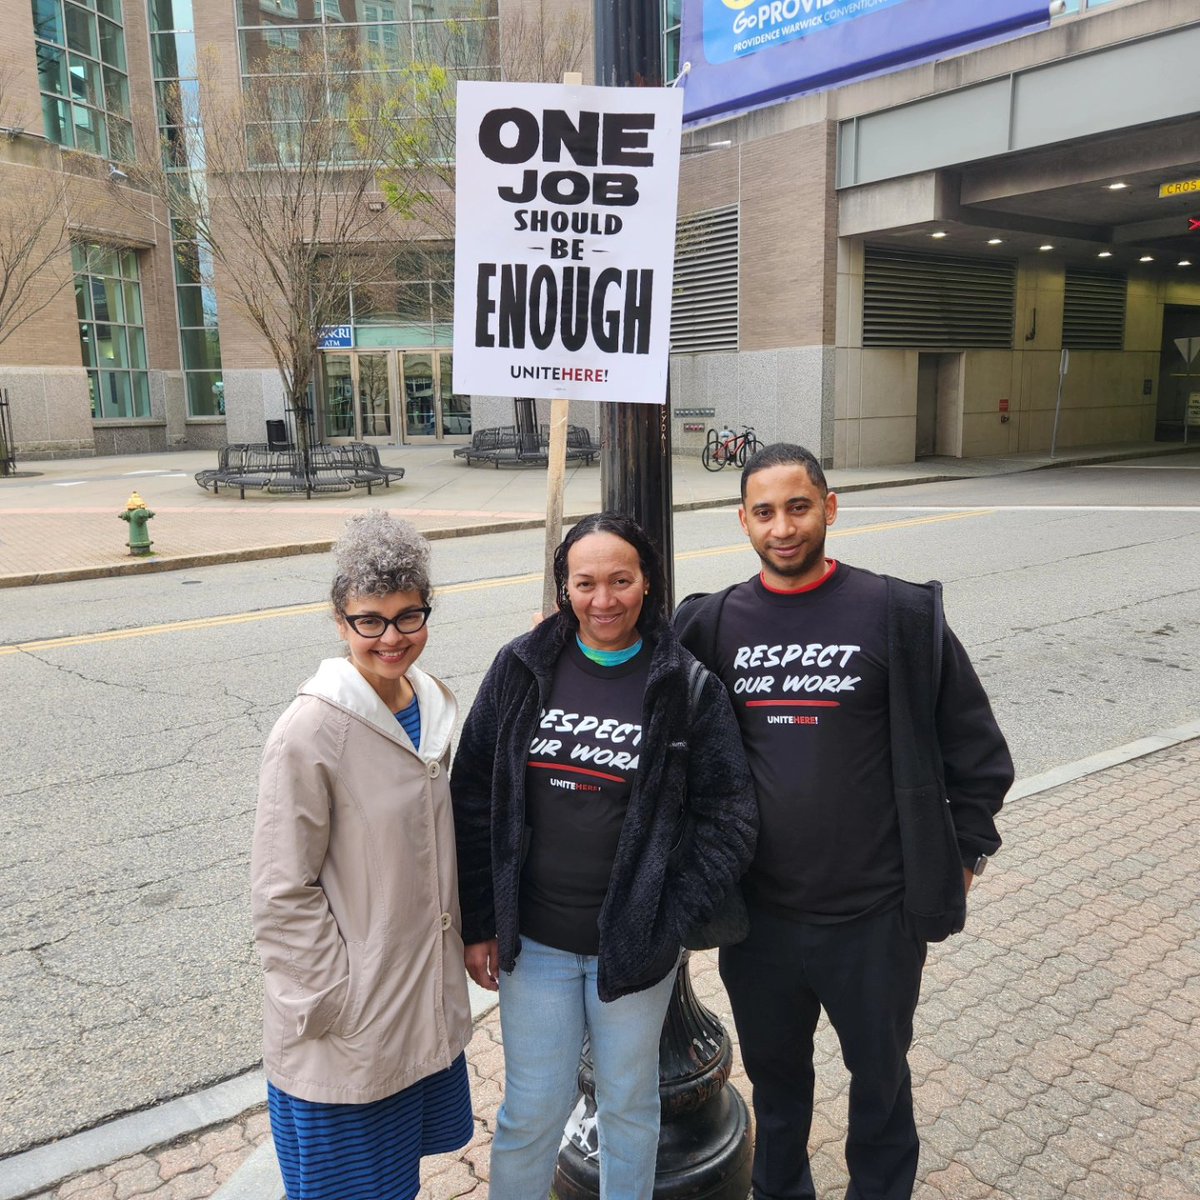 Happy May Day! Celebrating the power of workers with @UNITEHERE26 : 'One job should be enough!' #UnionStrong #Solidarity